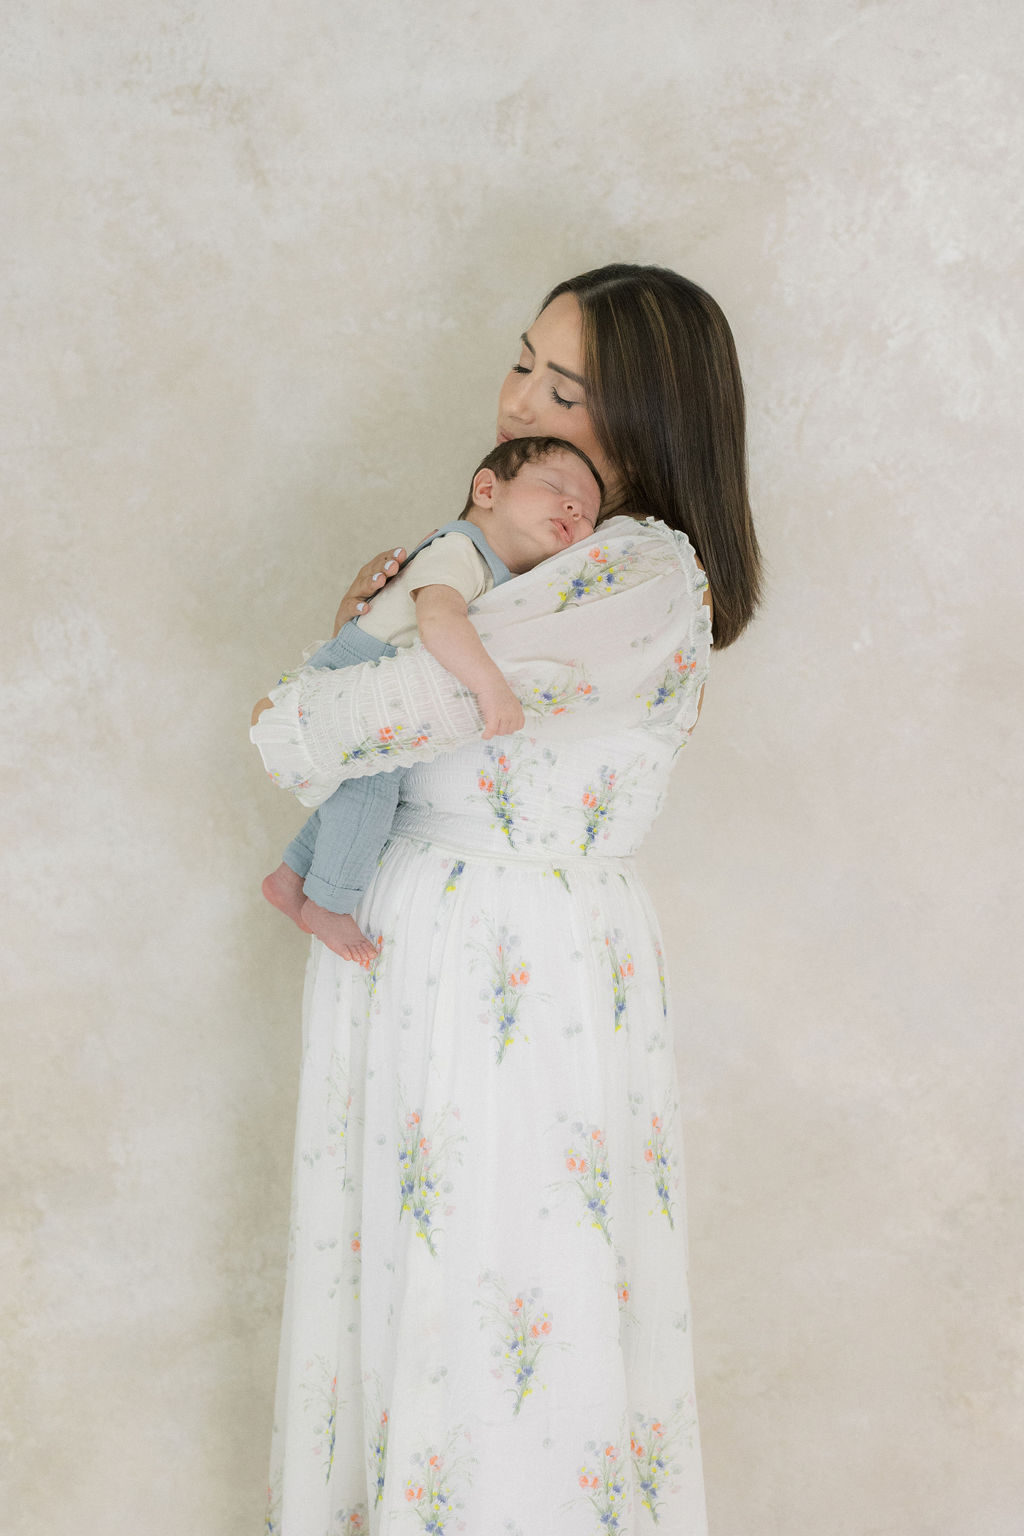 A new mother in a white floral print dress cradles her sleeping newborn on her shoulder while standing in a studio after some parenting classes nj